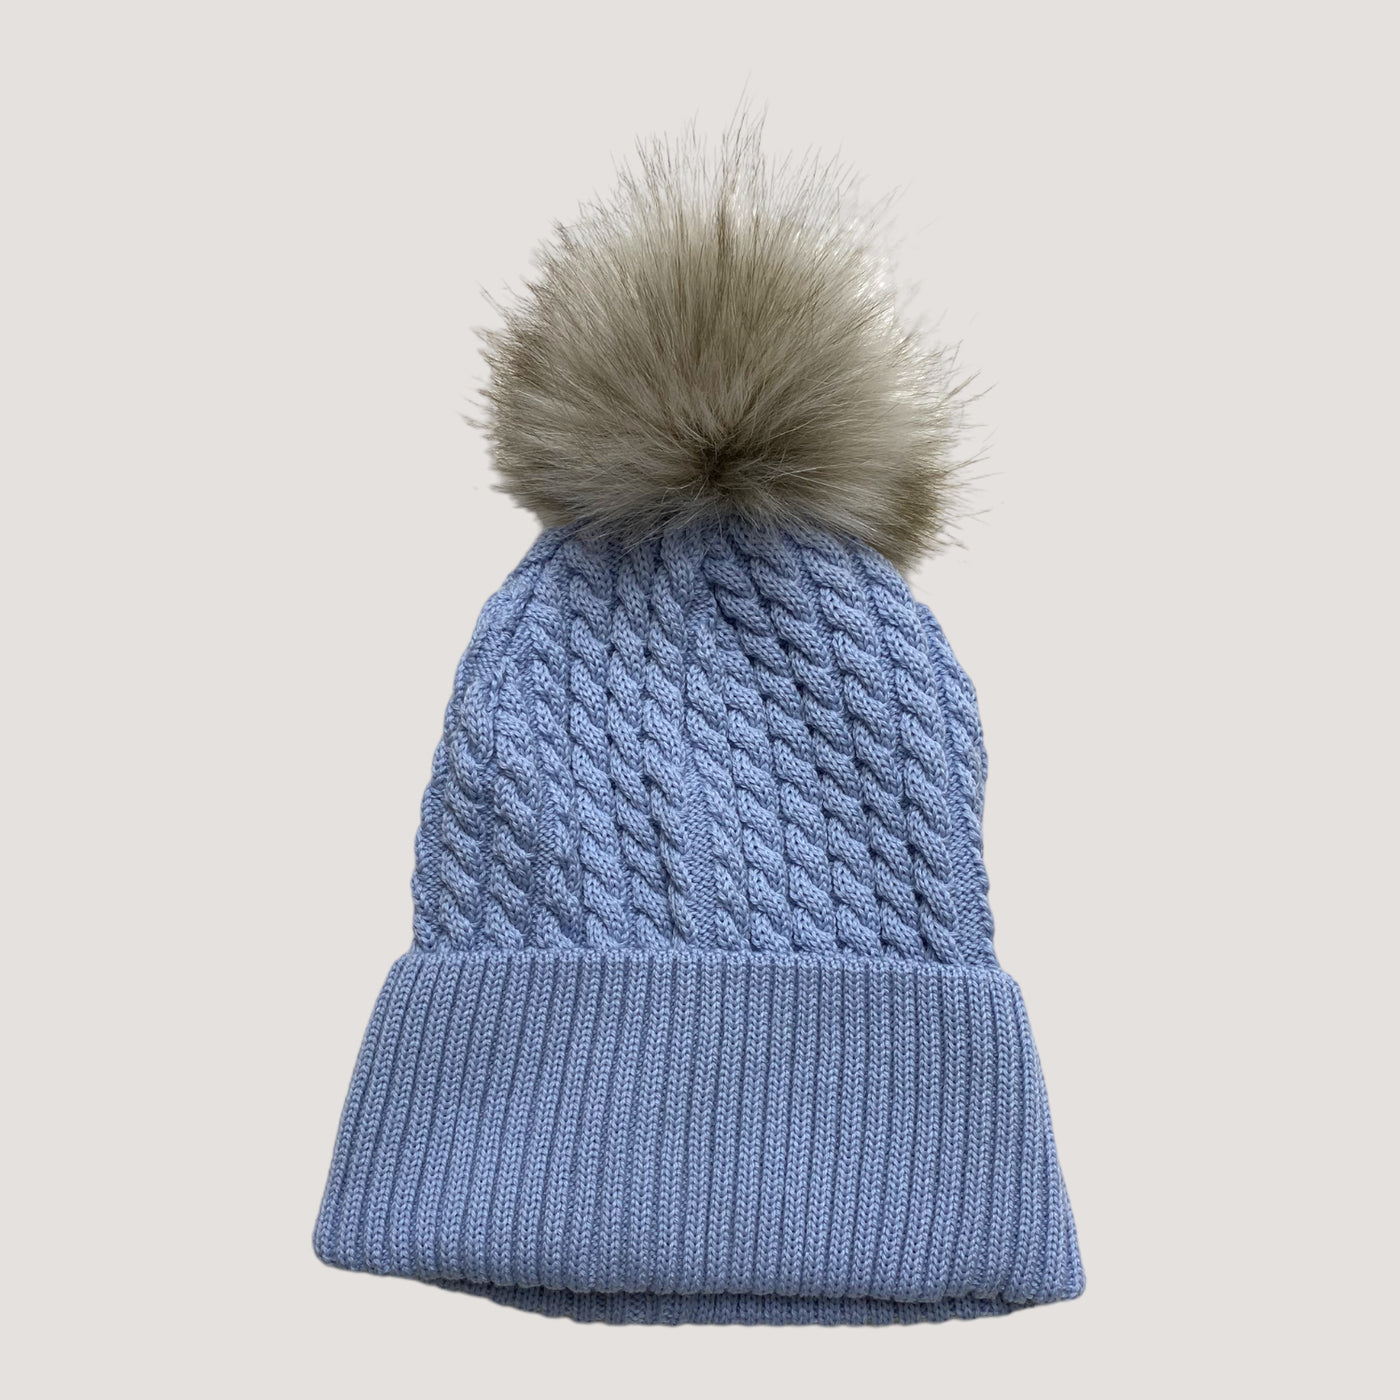 Metsola wool beanie, baby blue | adult one size